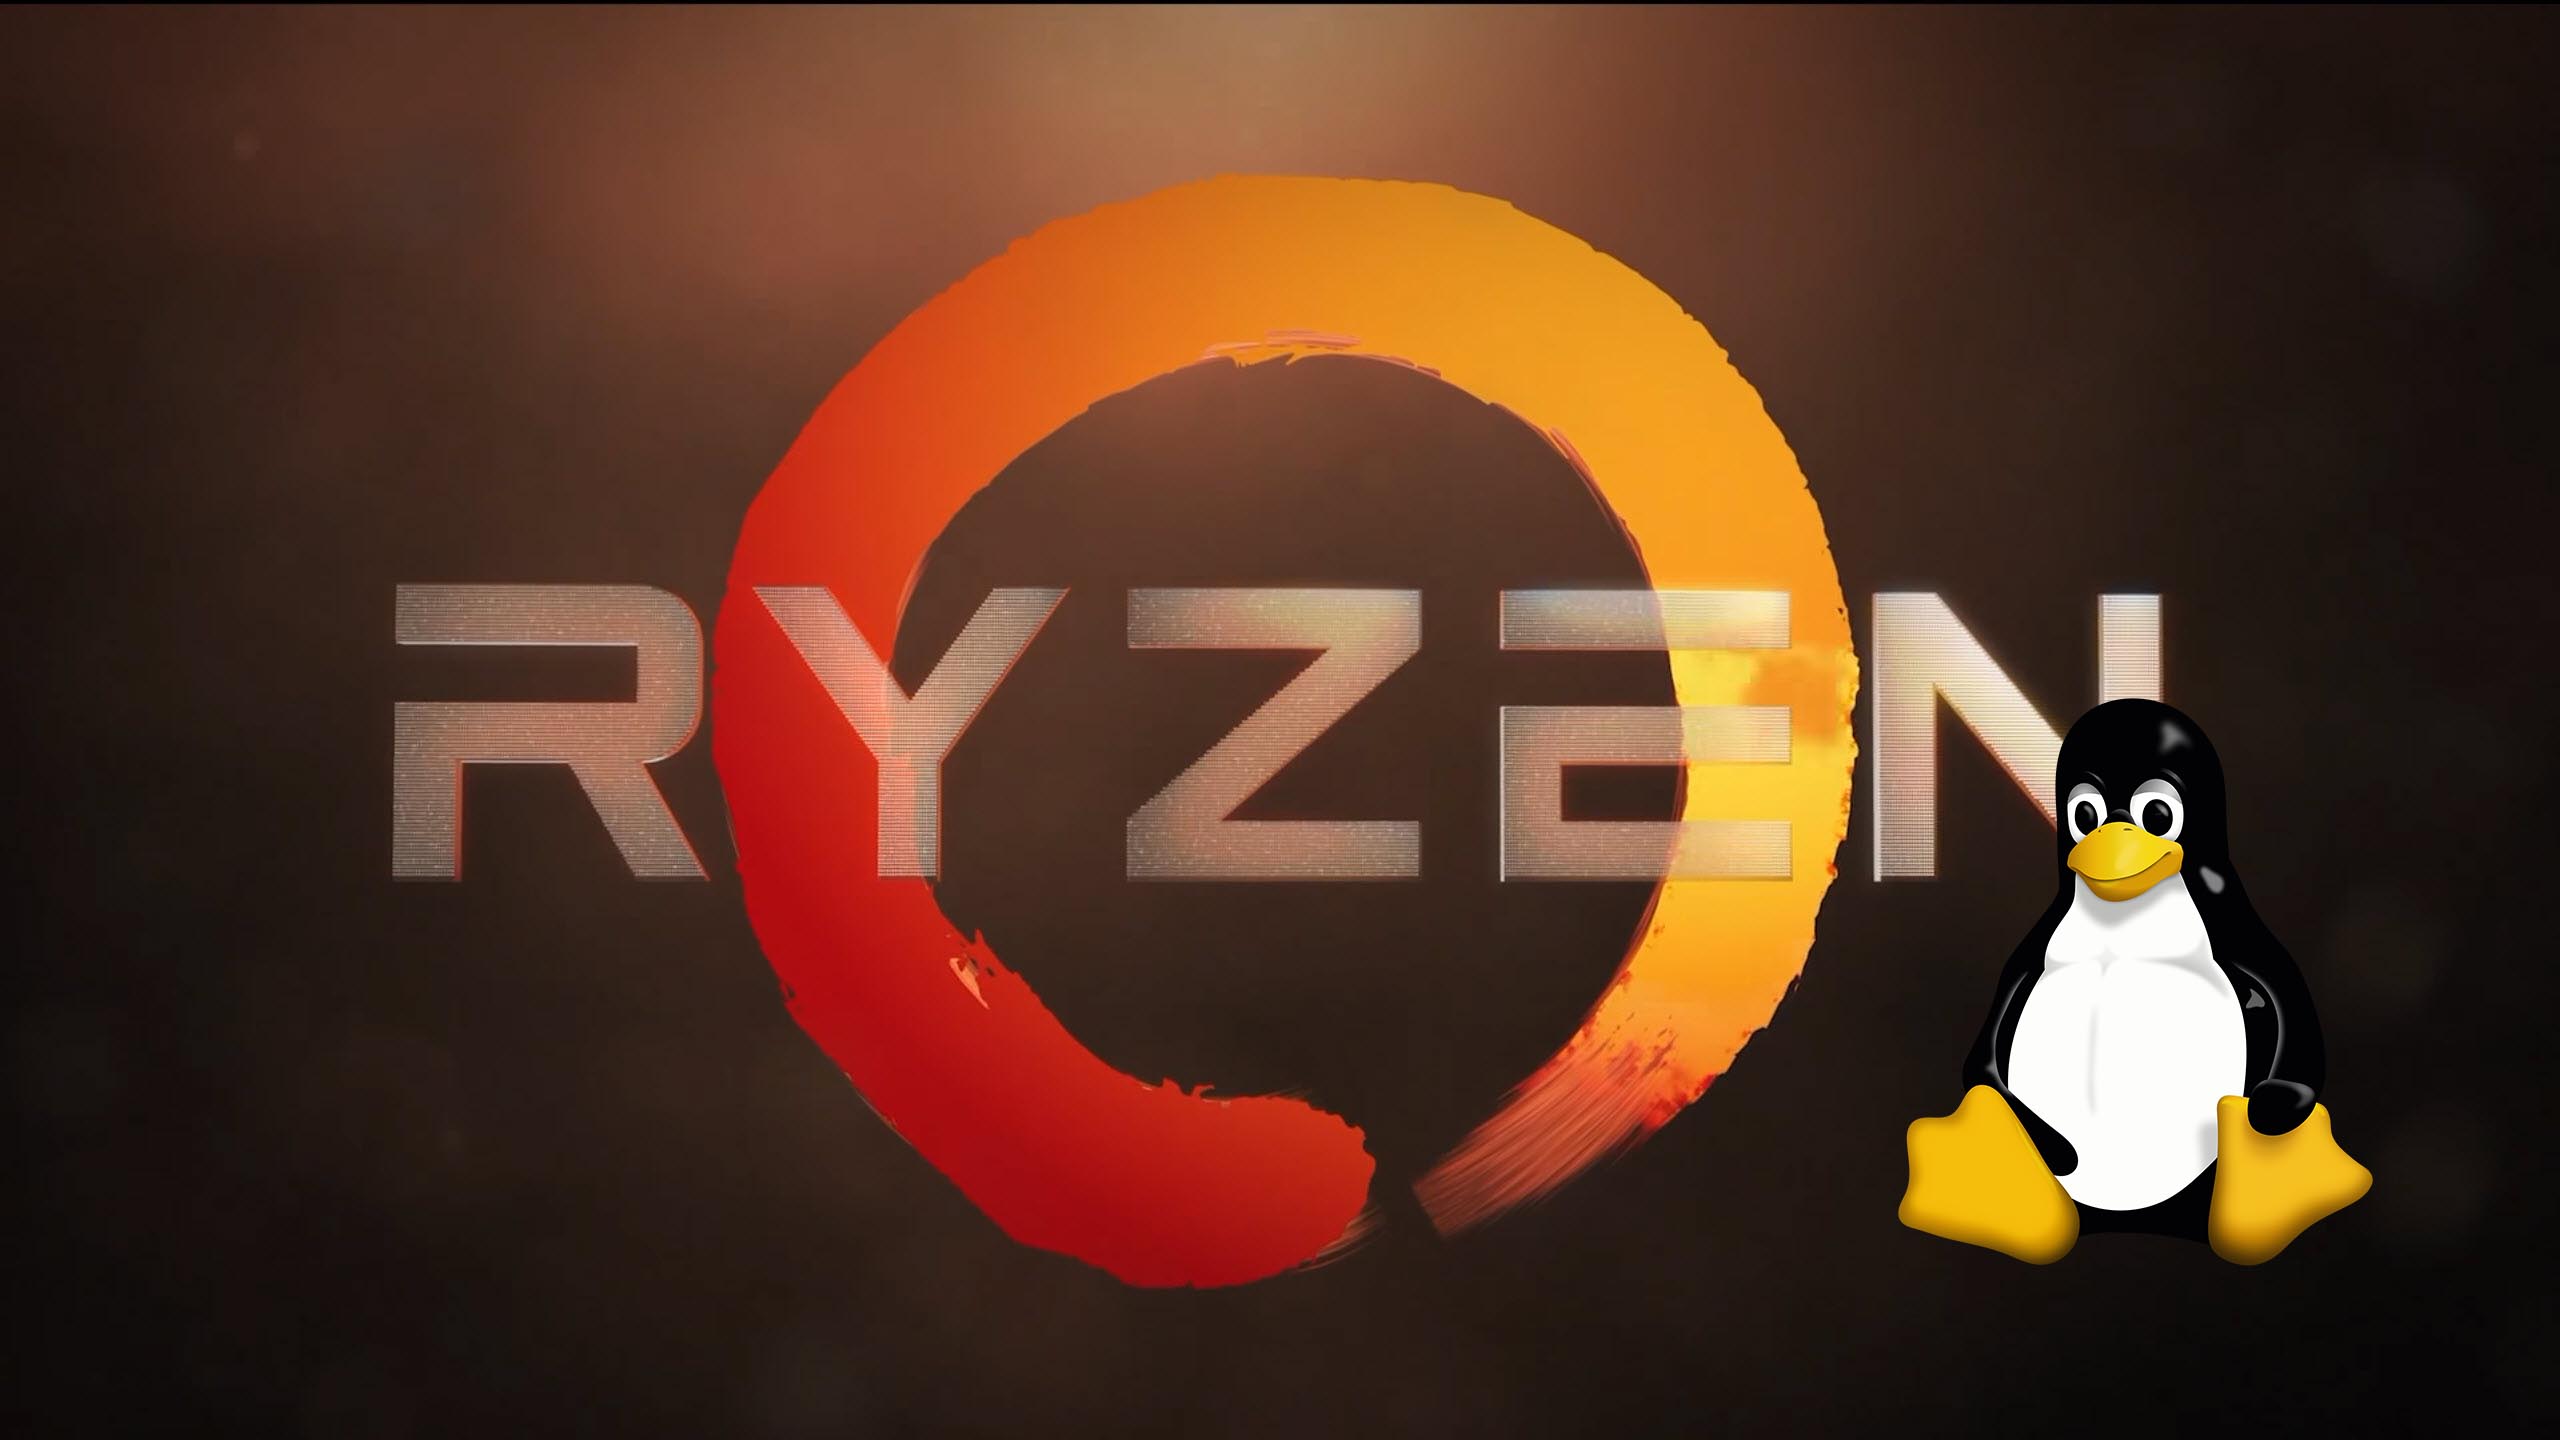 New Linux Kernel Fixes SMT Issue for AMD Ryzen CPUs